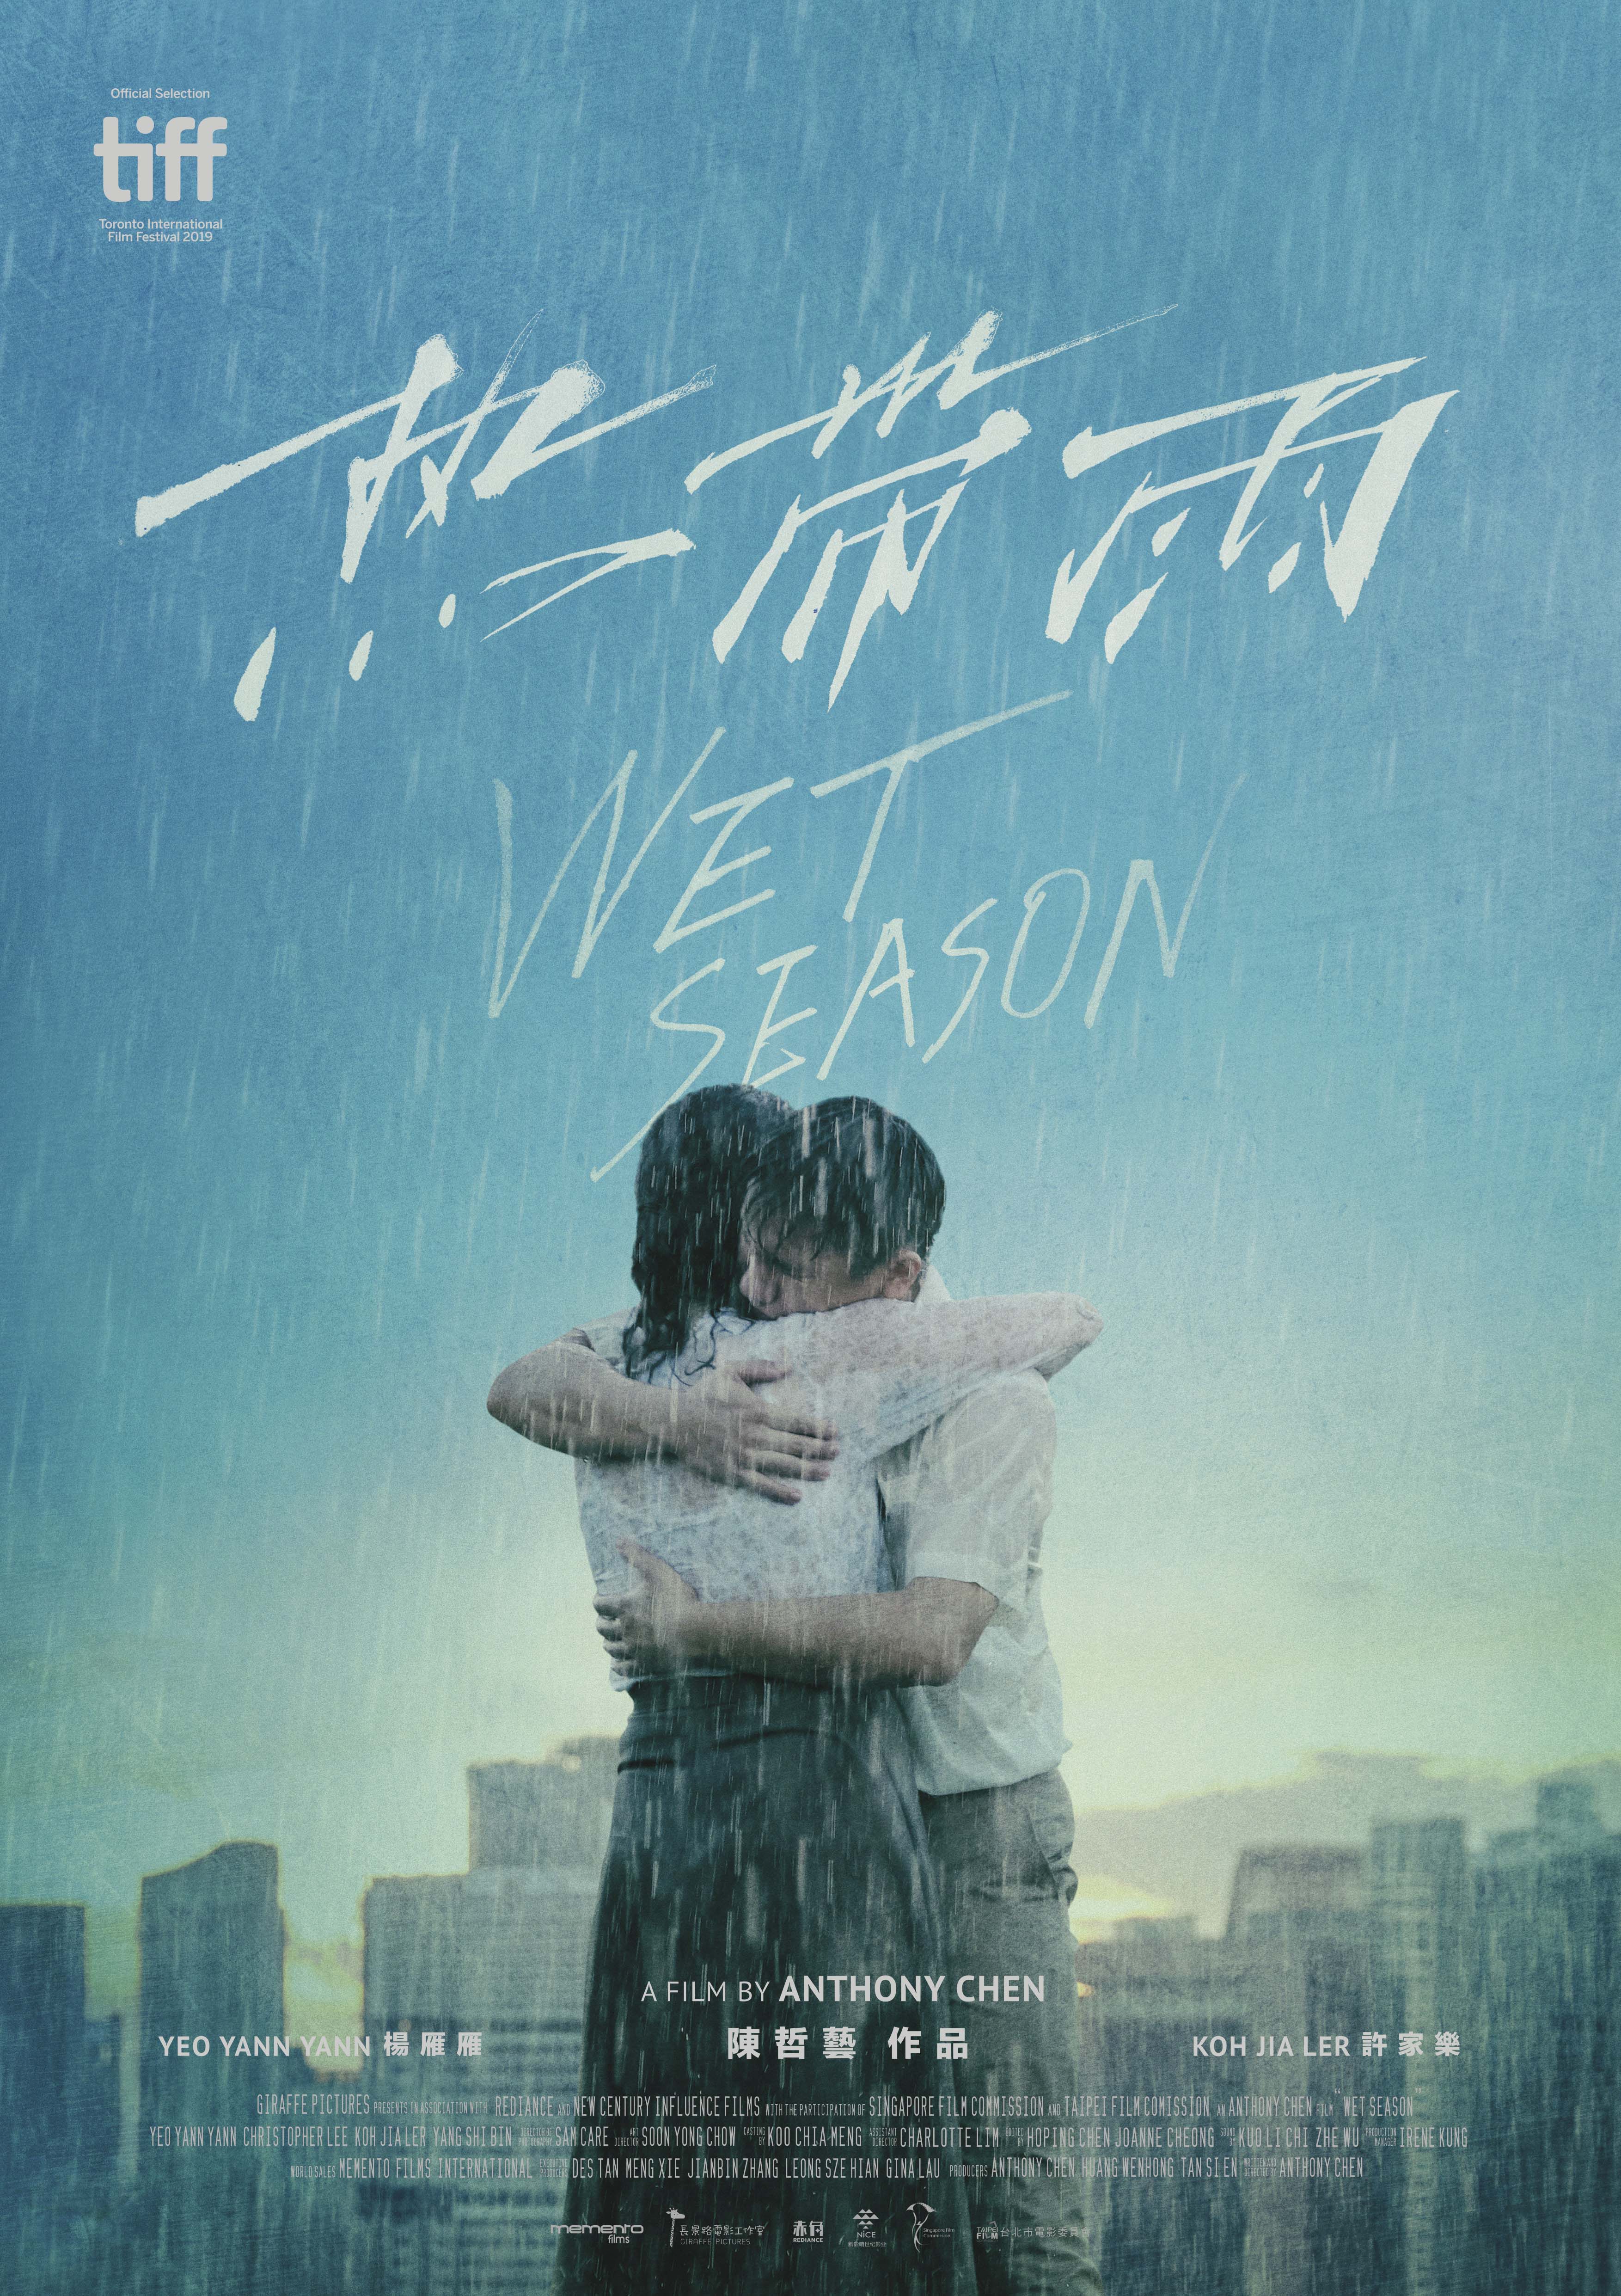 Anthony Chen’s “Wet Season” to world premiere in competition at Toronto International Film Festival - Alvinology